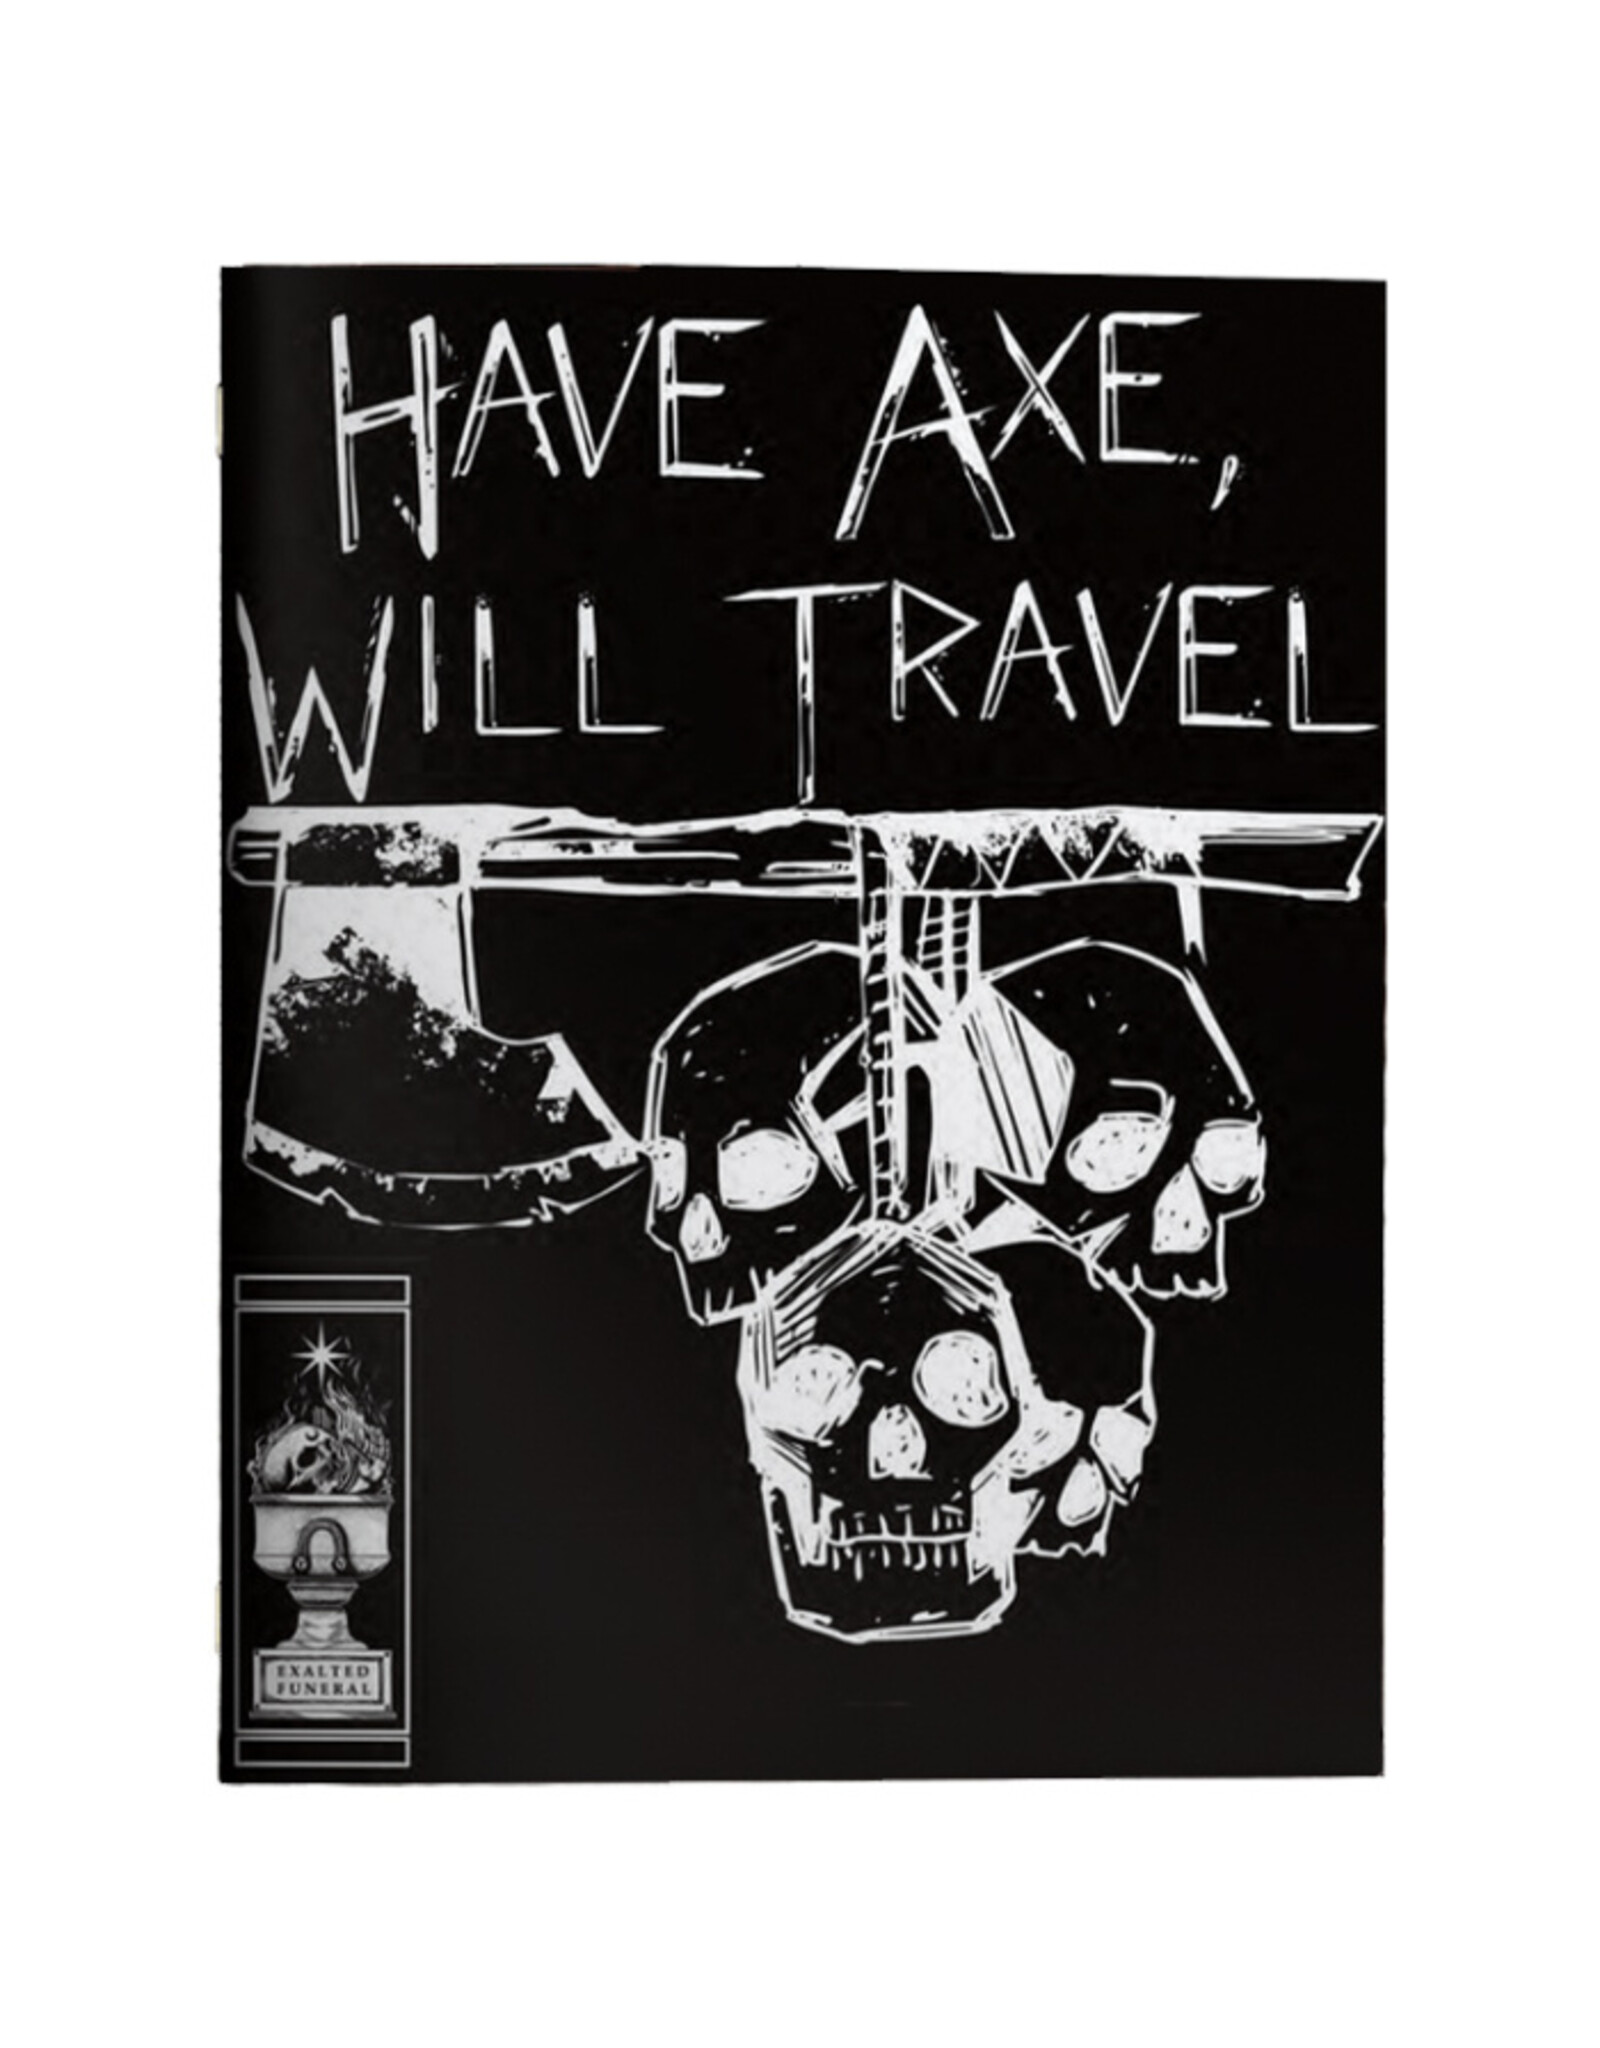 Exalted Funeral Press Have Axe Will Travel